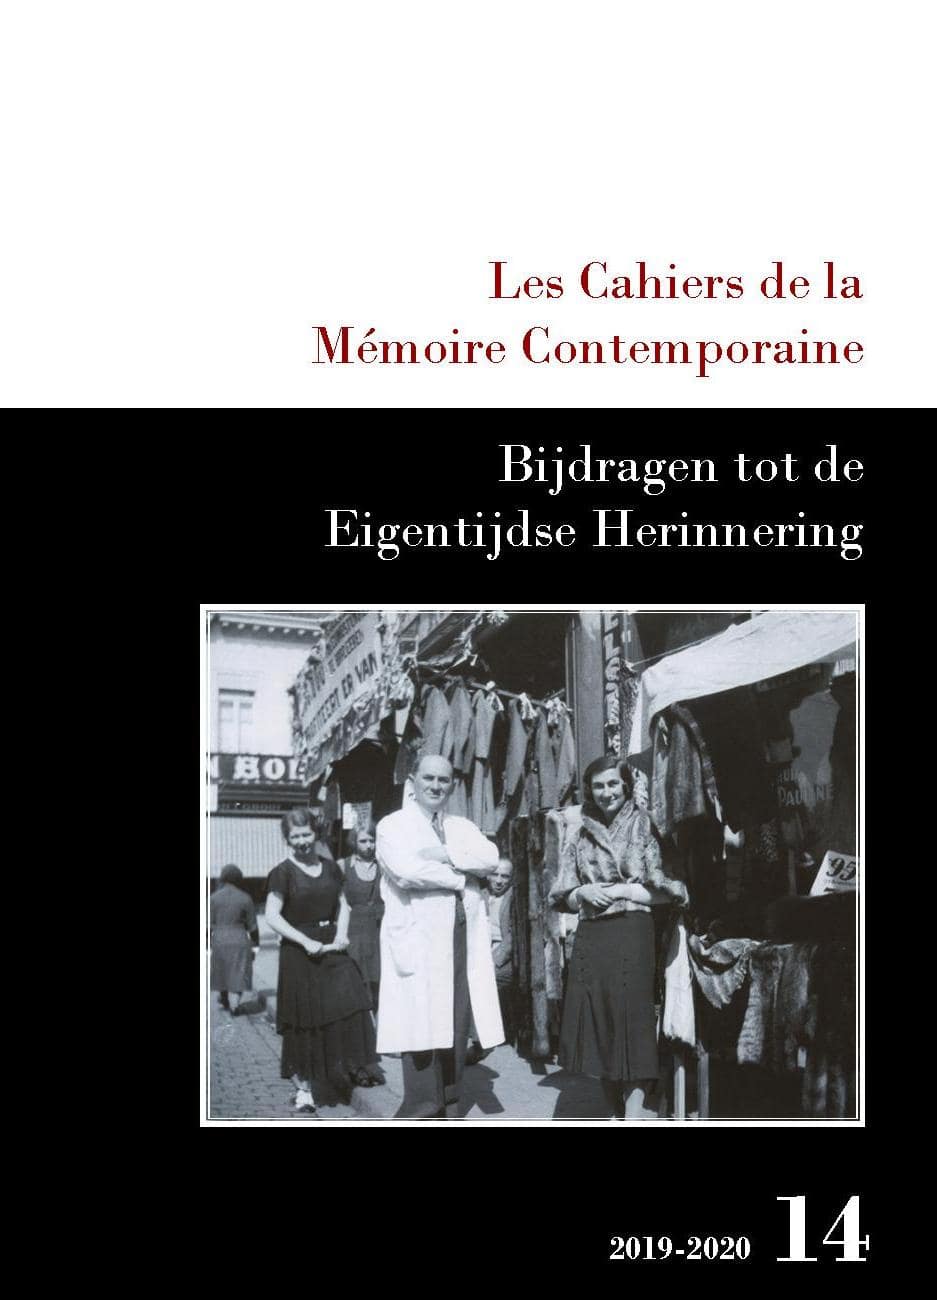 Cahiers 14 couverture 2019